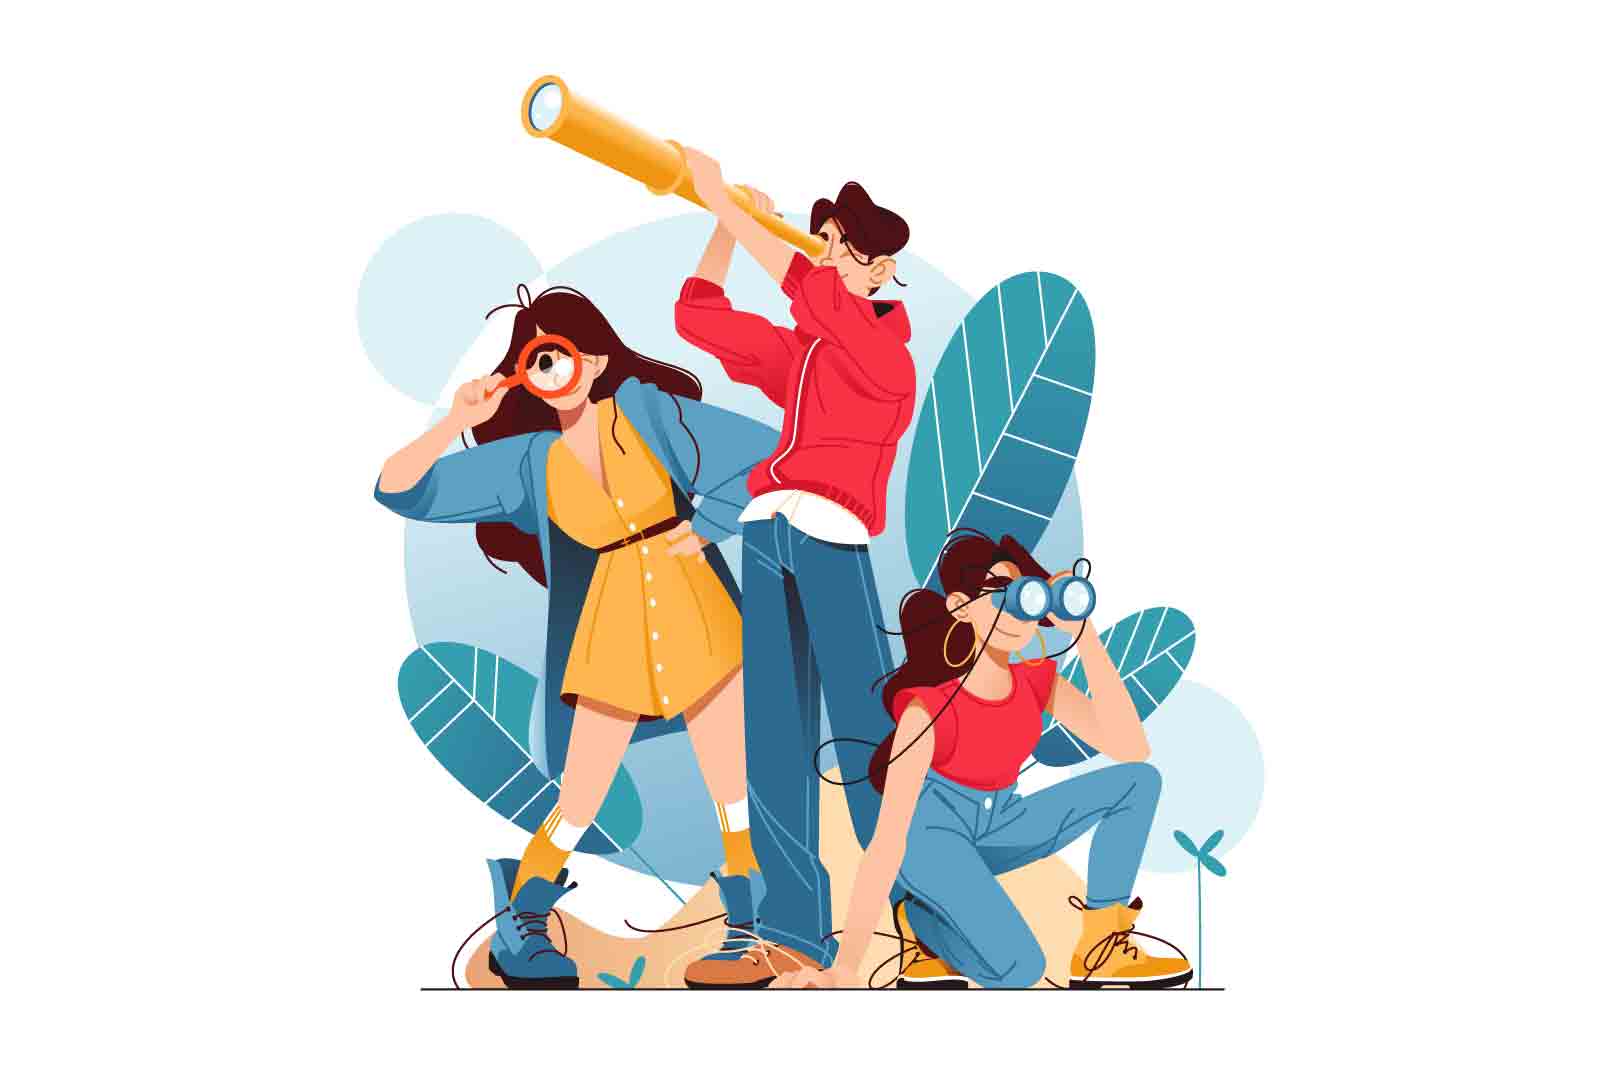 Three characters searching for someone or something,vector illustration. With telescopes, magnifying glass and binoculars.